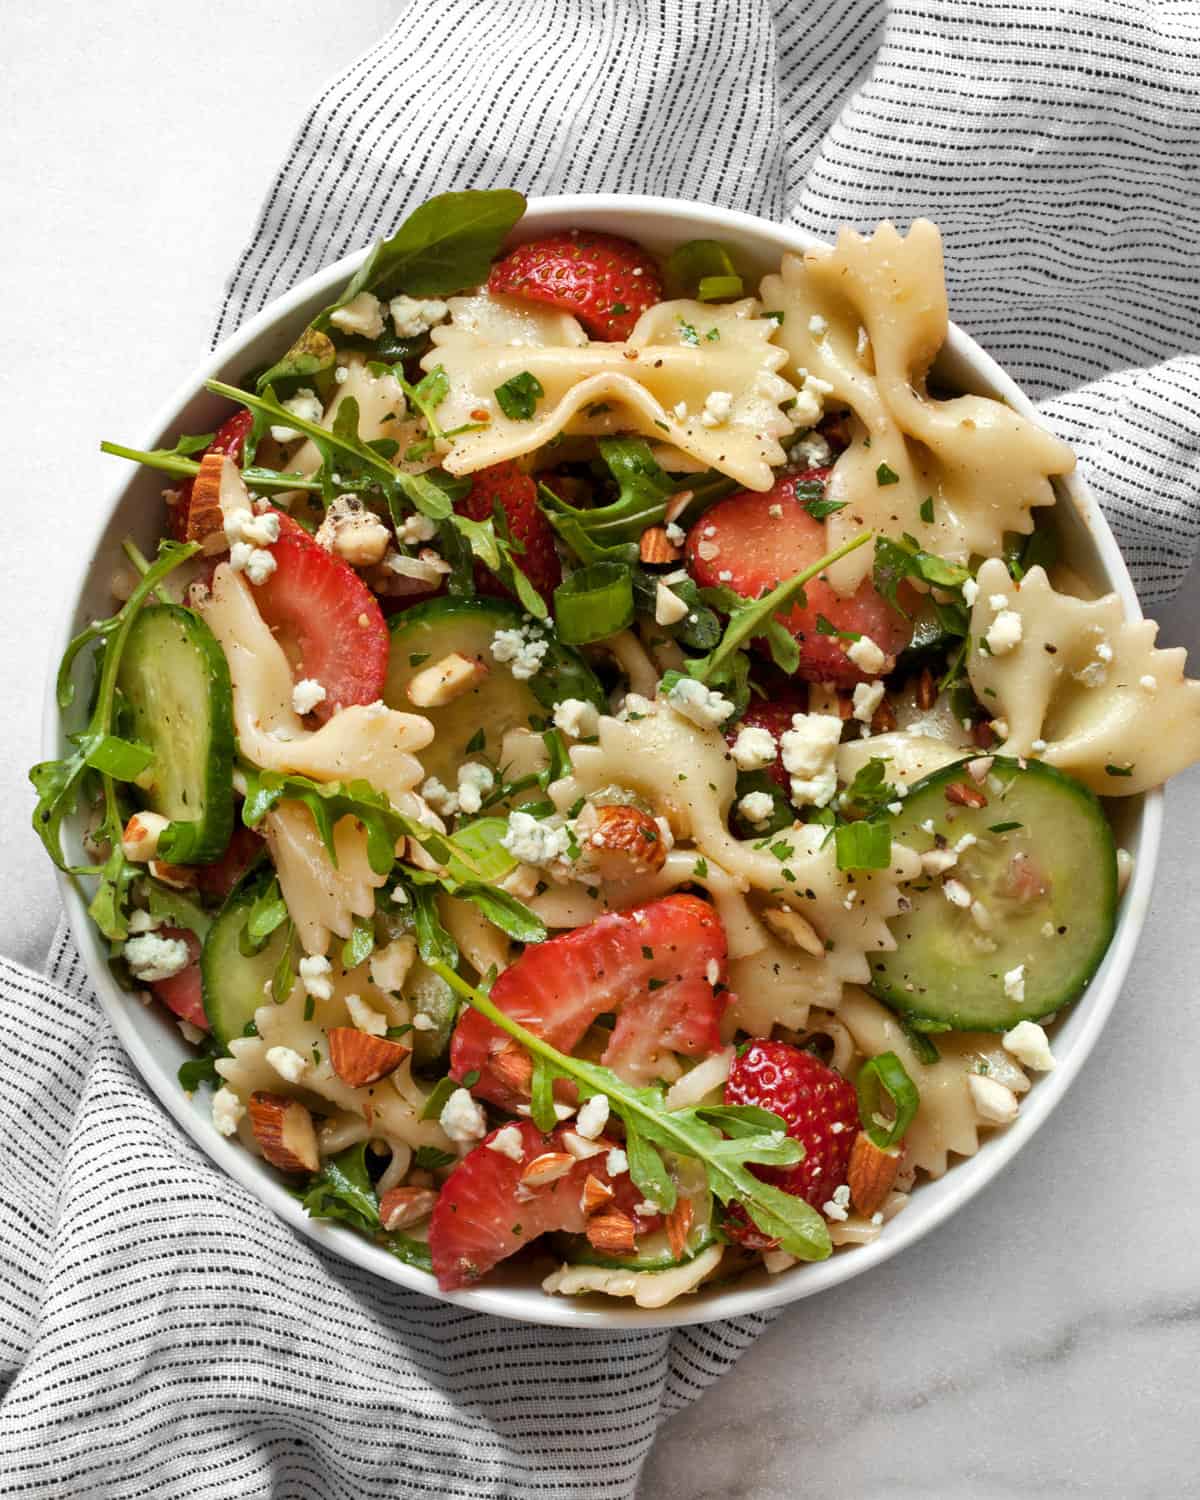 Strawberry cucumber pasta salad in a small bowl.